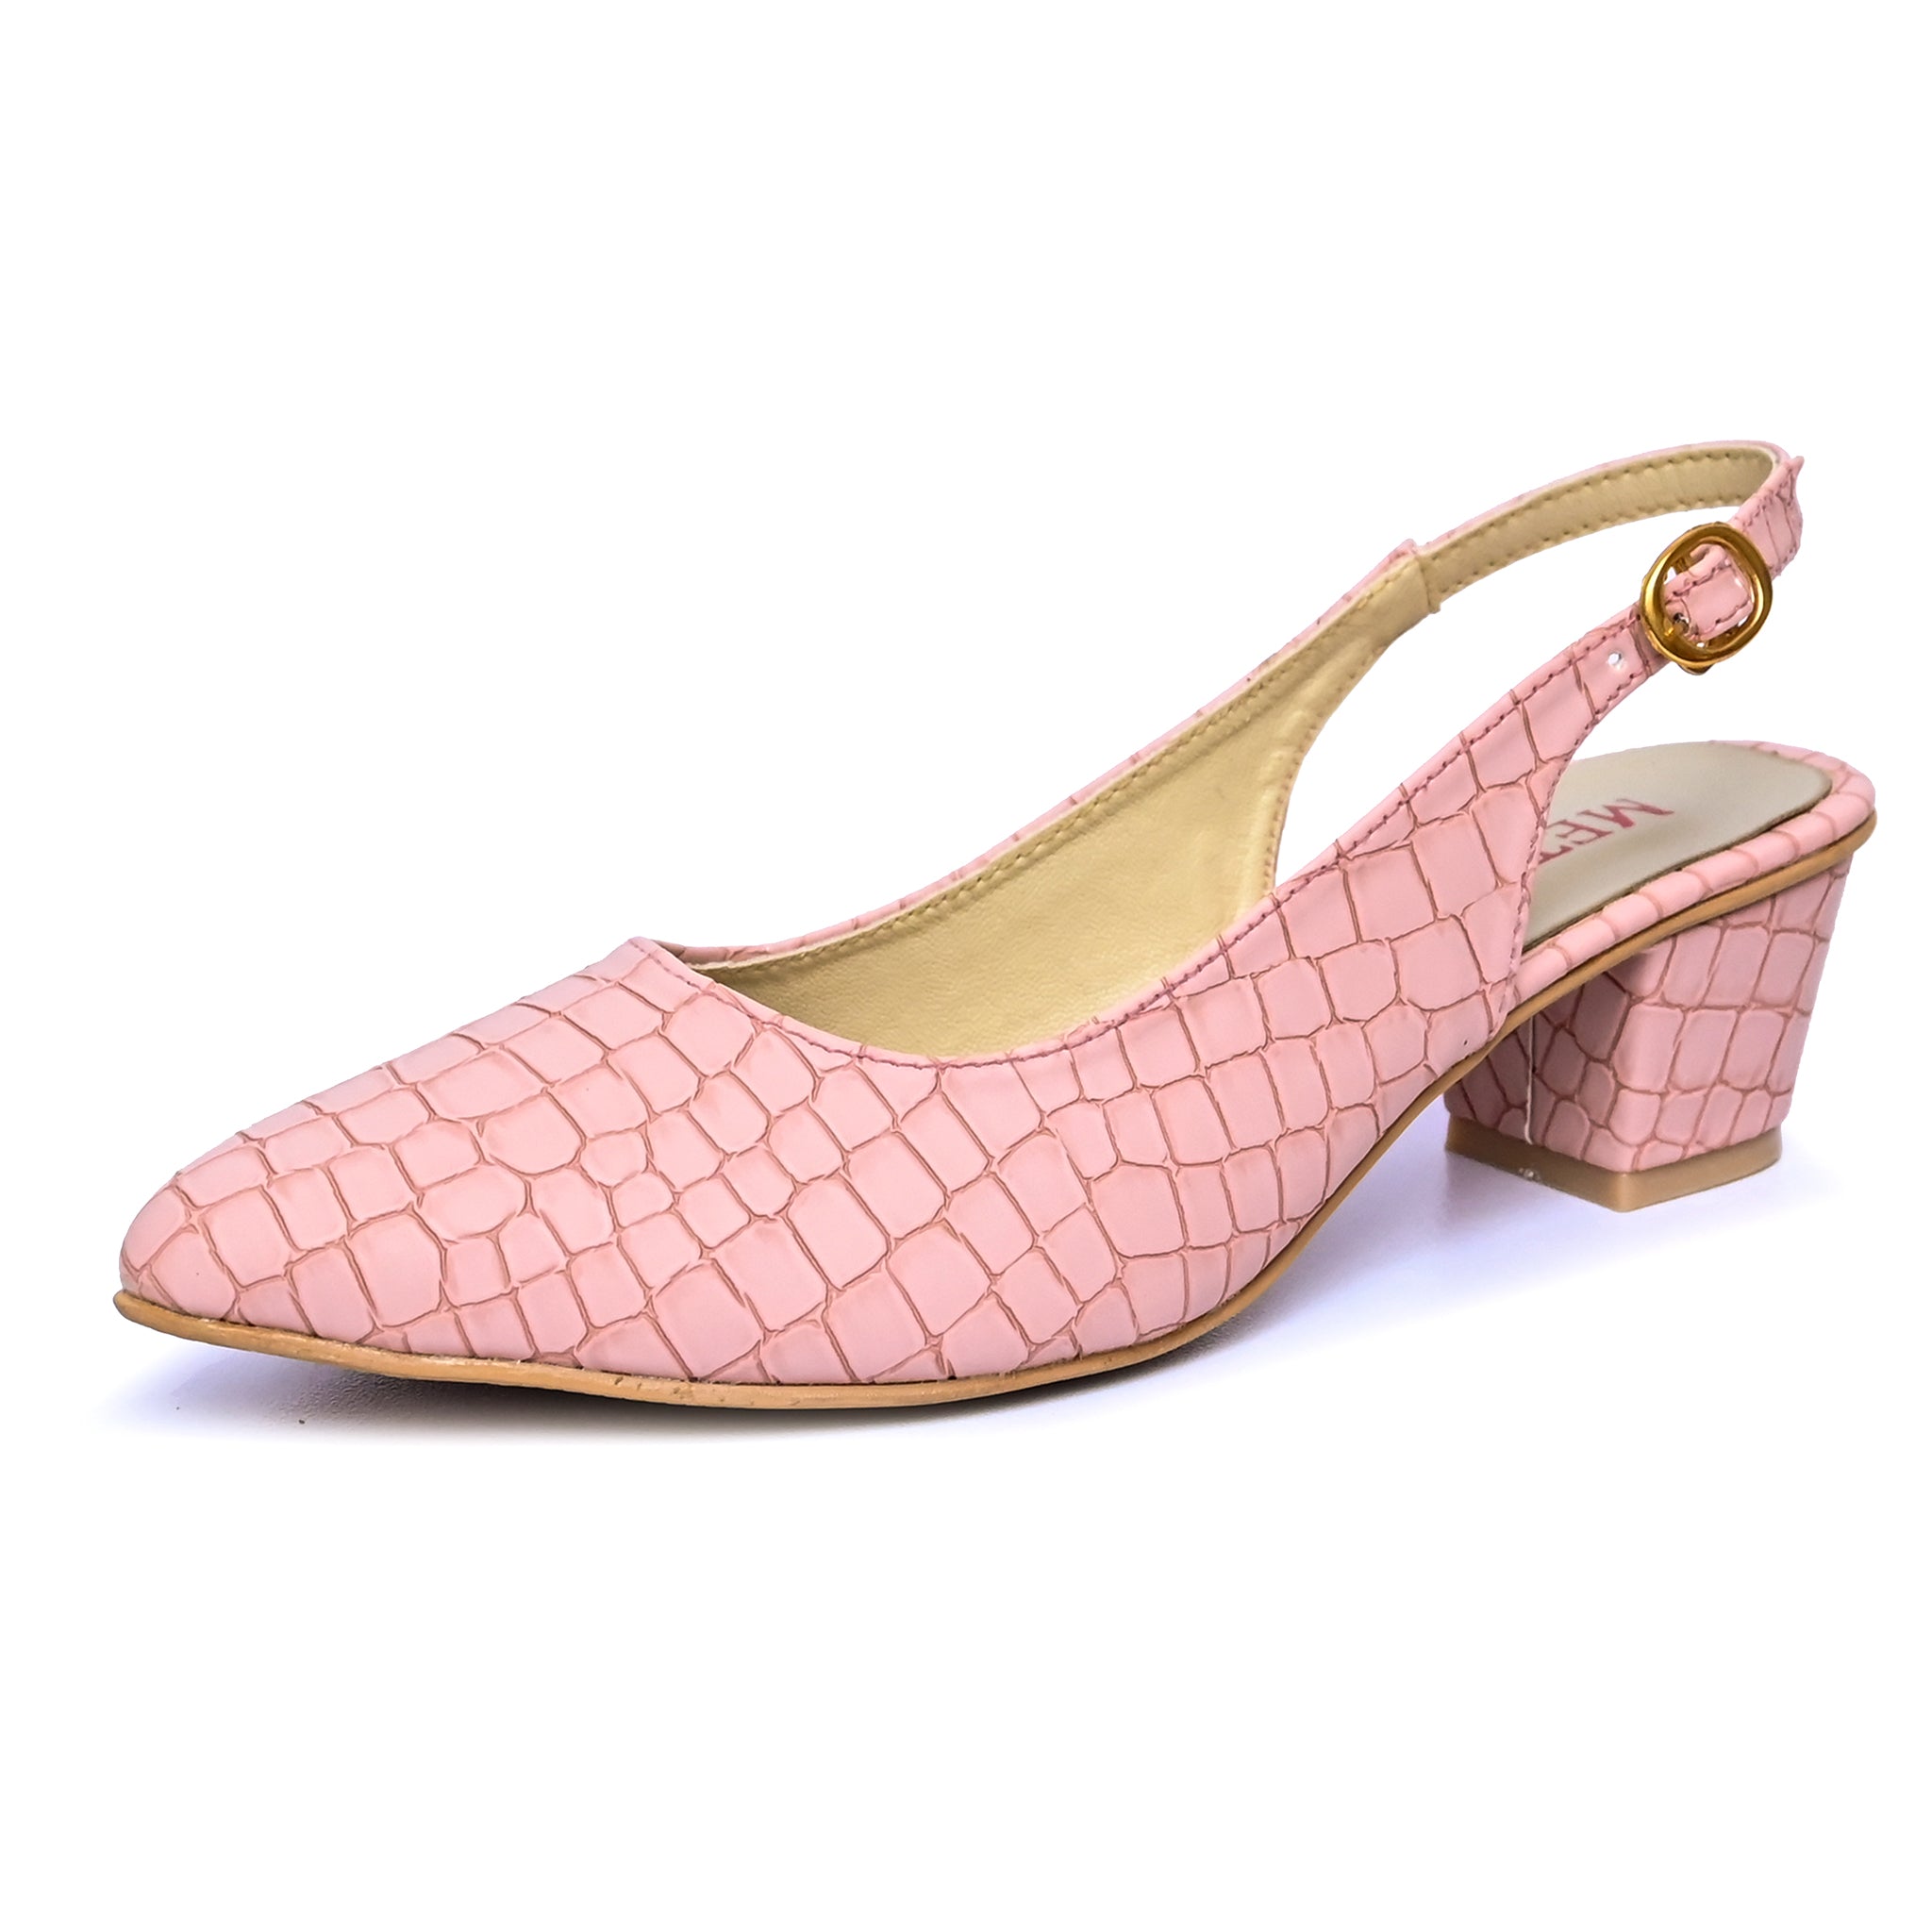 Court Shoes For Women - Metro-10900479